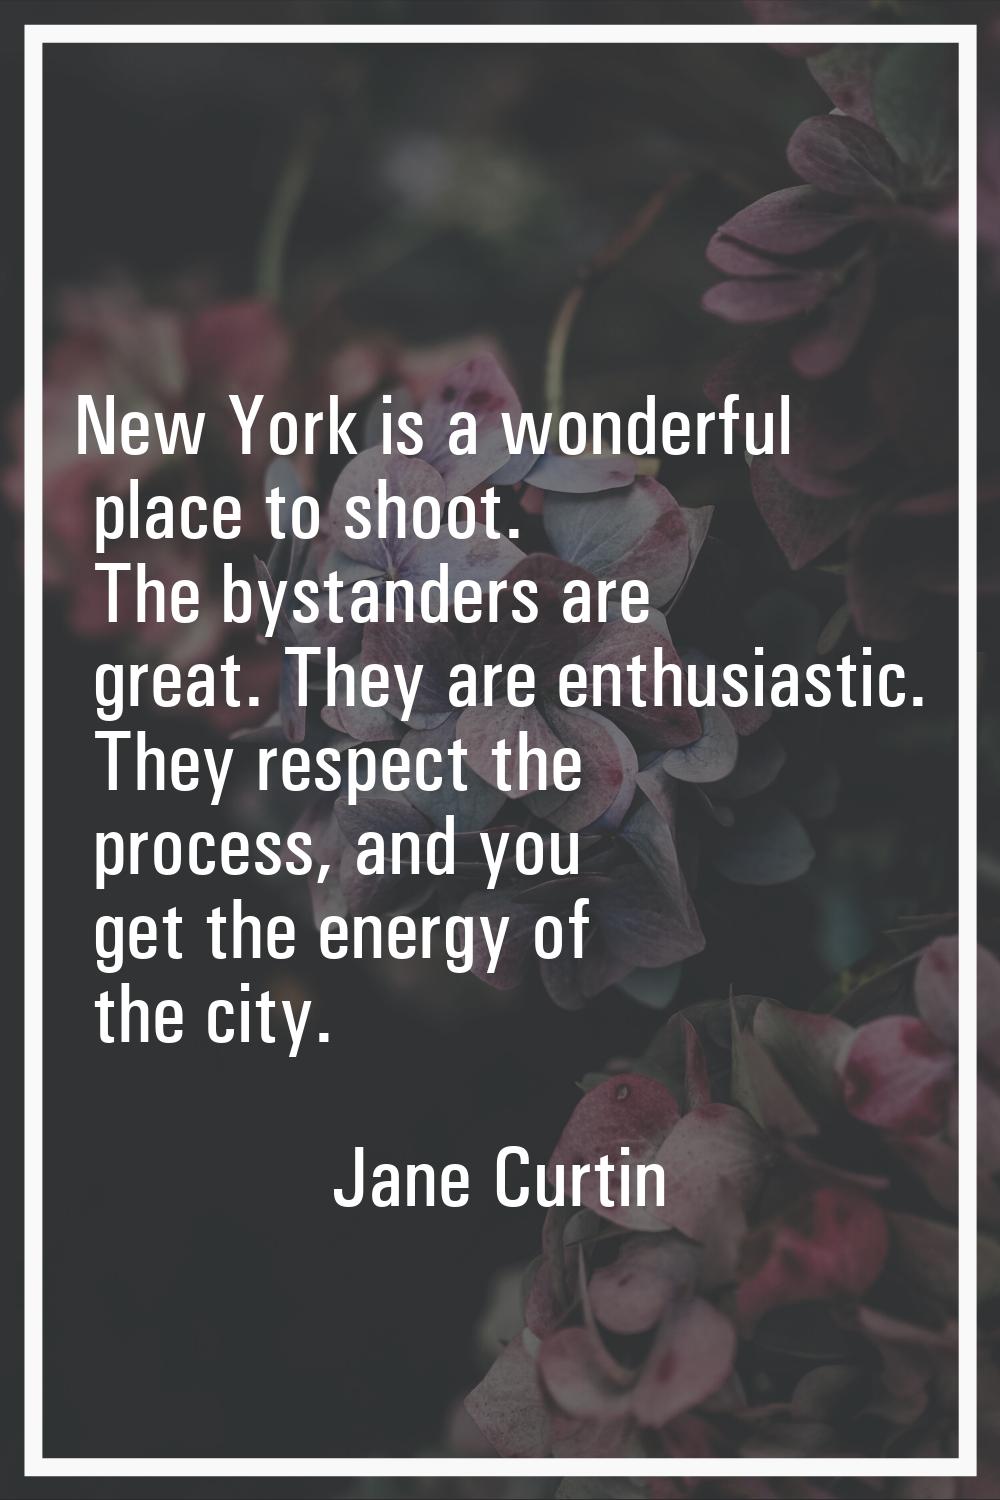 New York is a wonderful place to shoot. The bystanders are great. They are enthusiastic. They respe